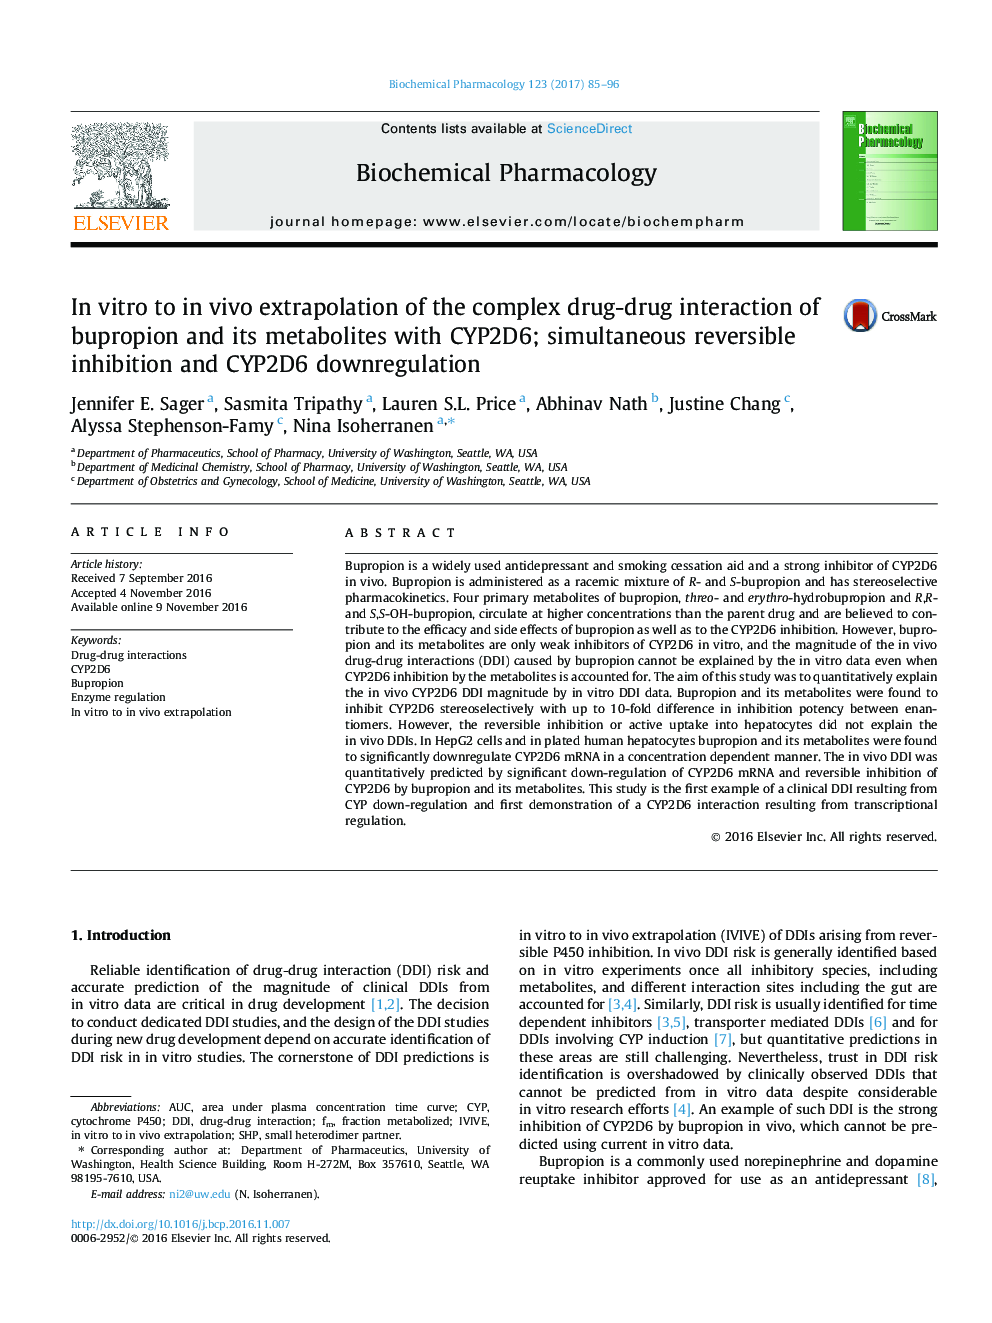 In vitro to in vivo extrapolation of the complex drug-drug interaction of bupropion and its metabolites with CYP2D6; simultaneous reversible inhibition and CYP2D6 downregulation